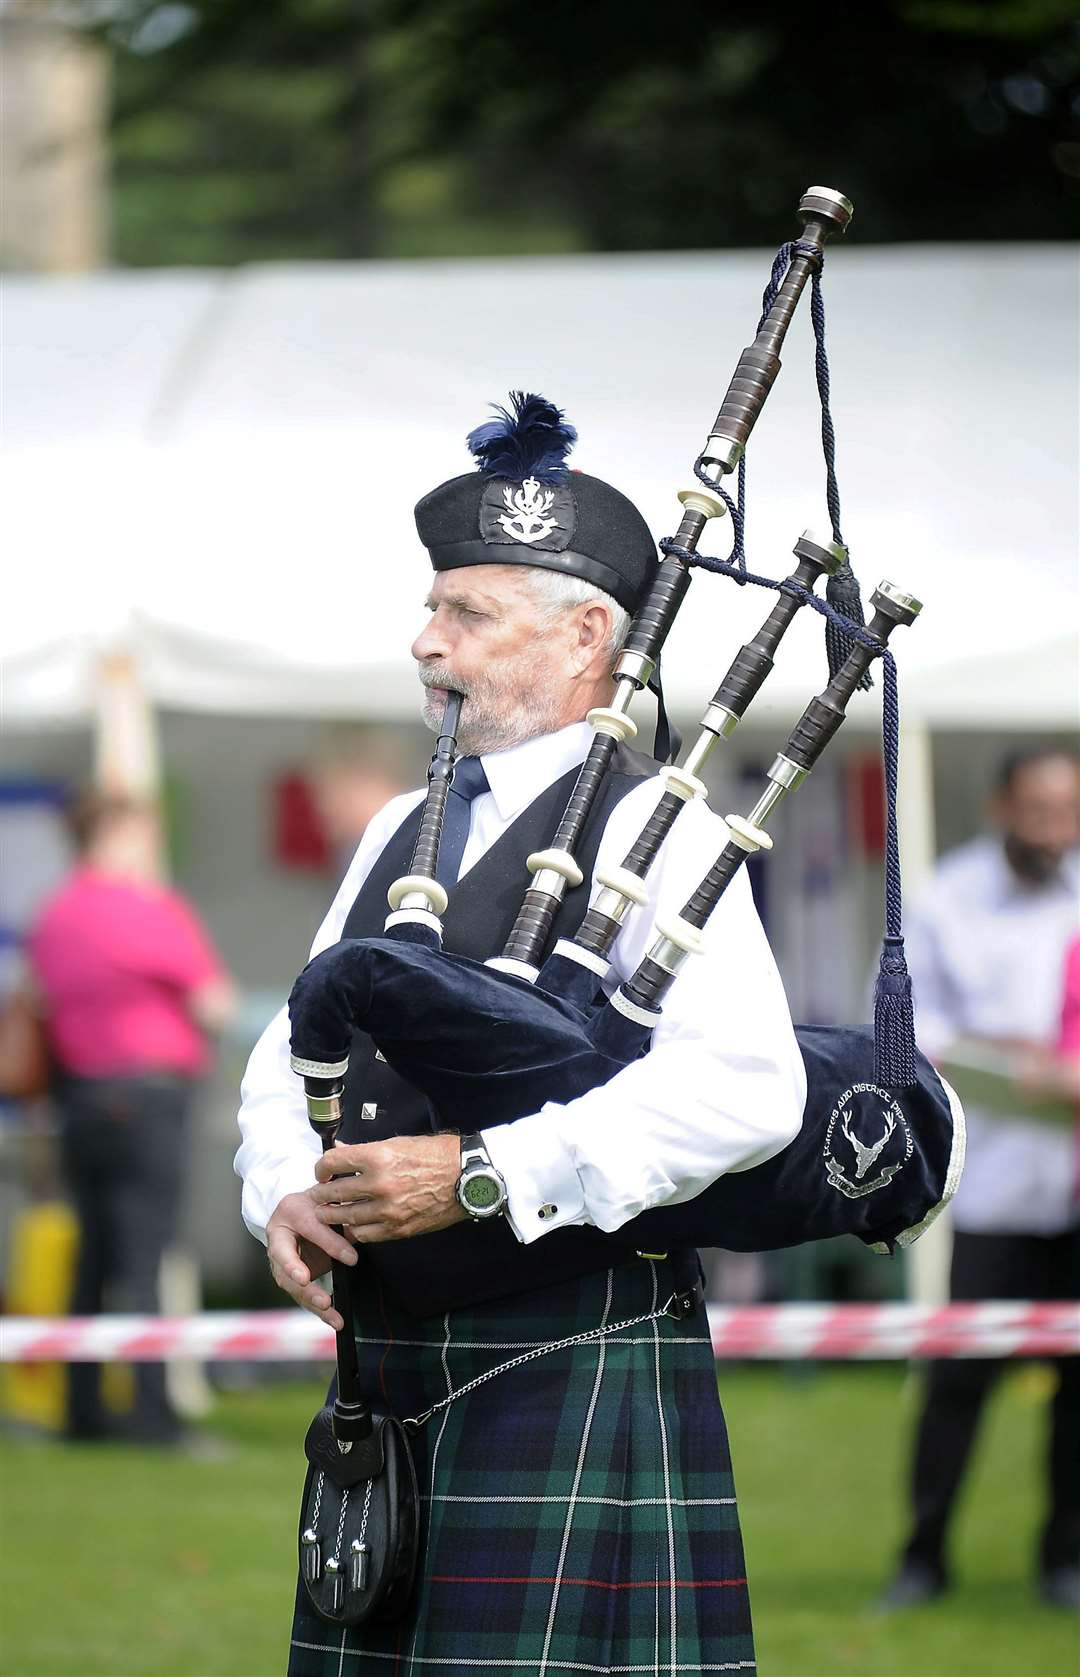 Forres Pipe Band performed three times.